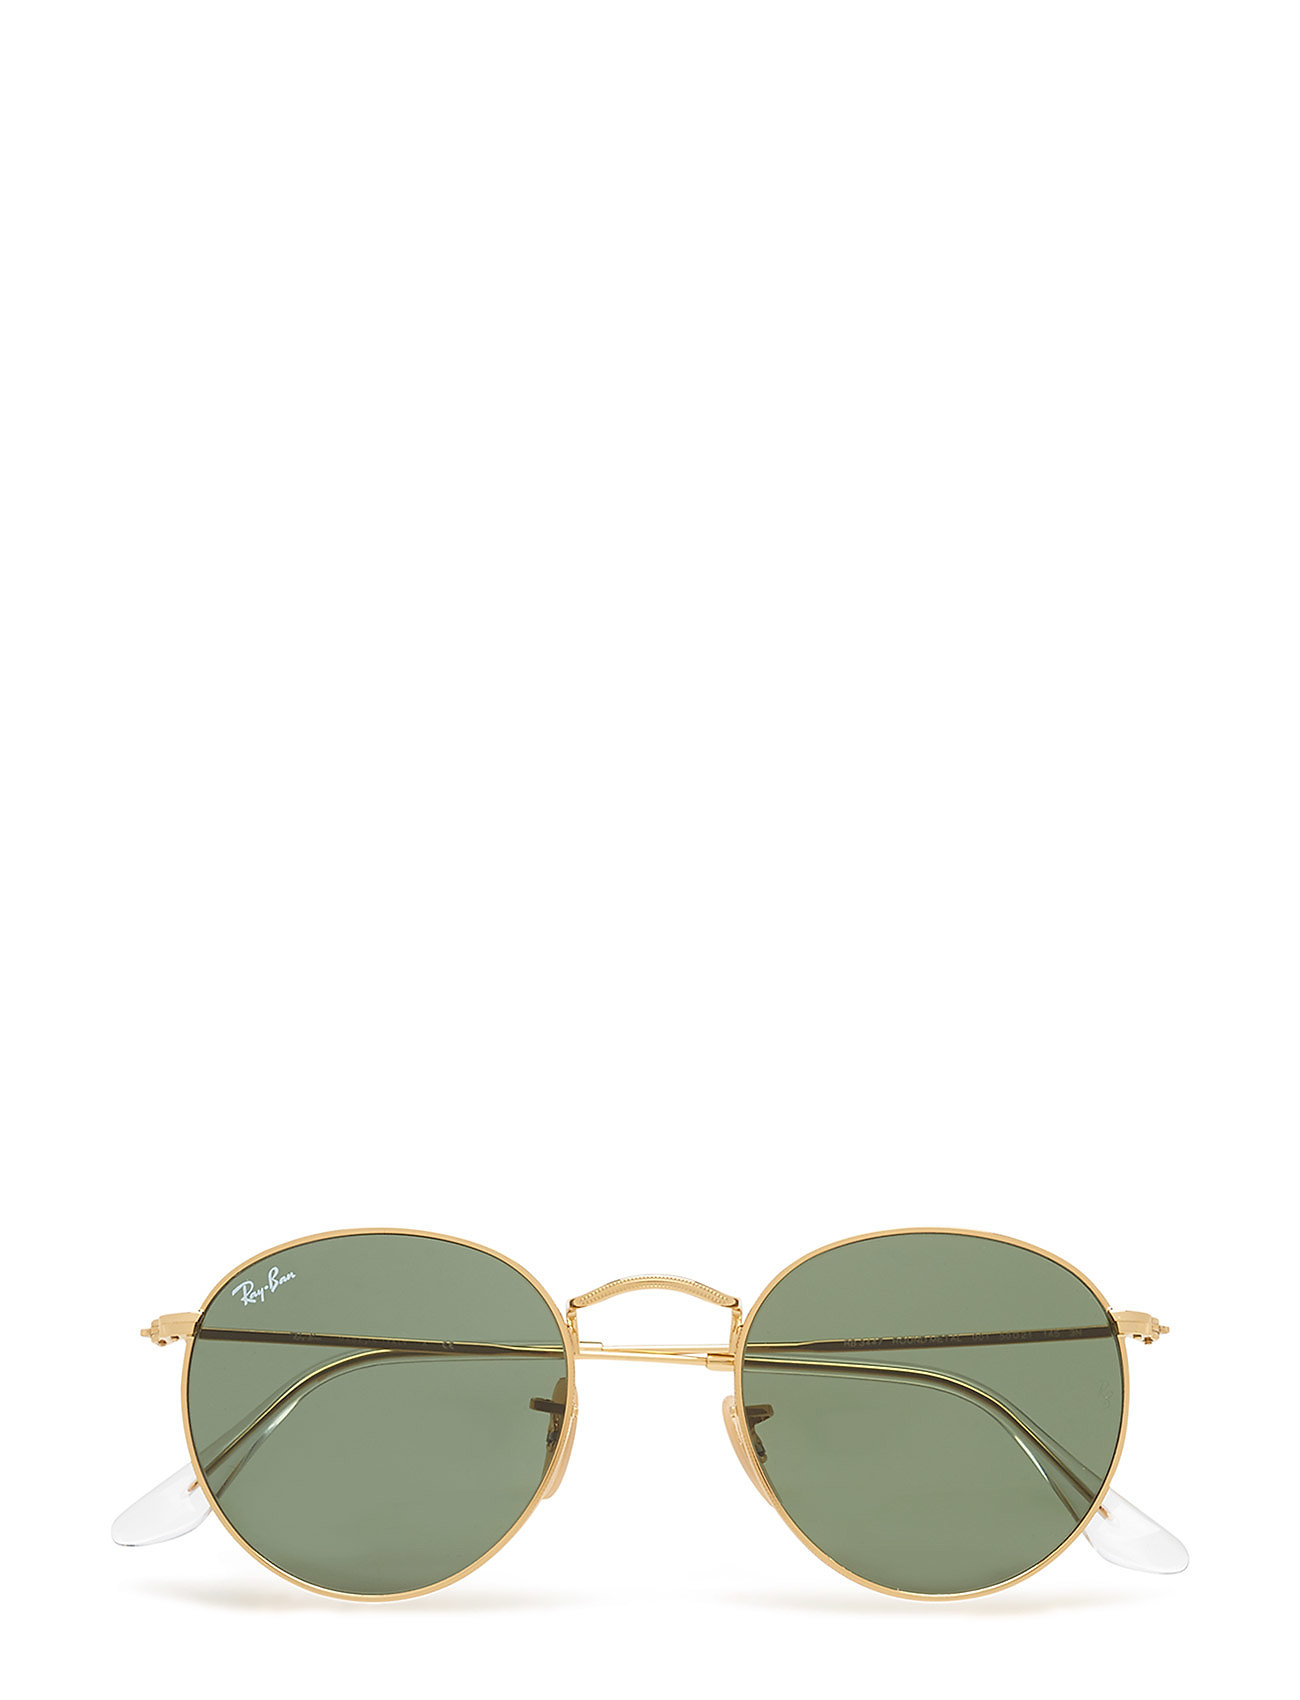 0Rb3447 Designers Sunglasses Round Frame Sunglasses Gold Ray-Ban